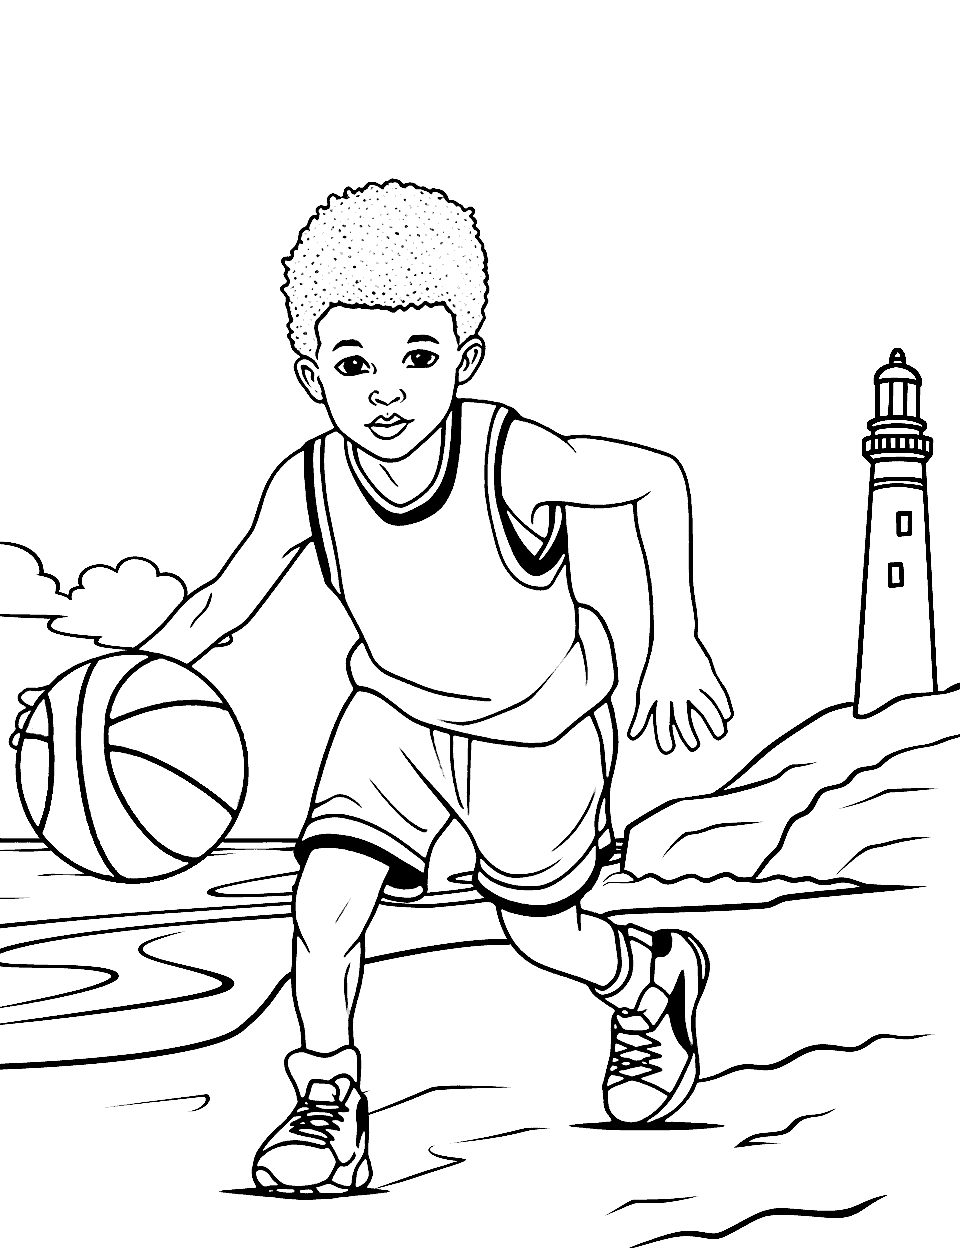 Lighthouse Beach Game Basketball Coloring Page - A kid playing basketball on a beach near a lighthouse.